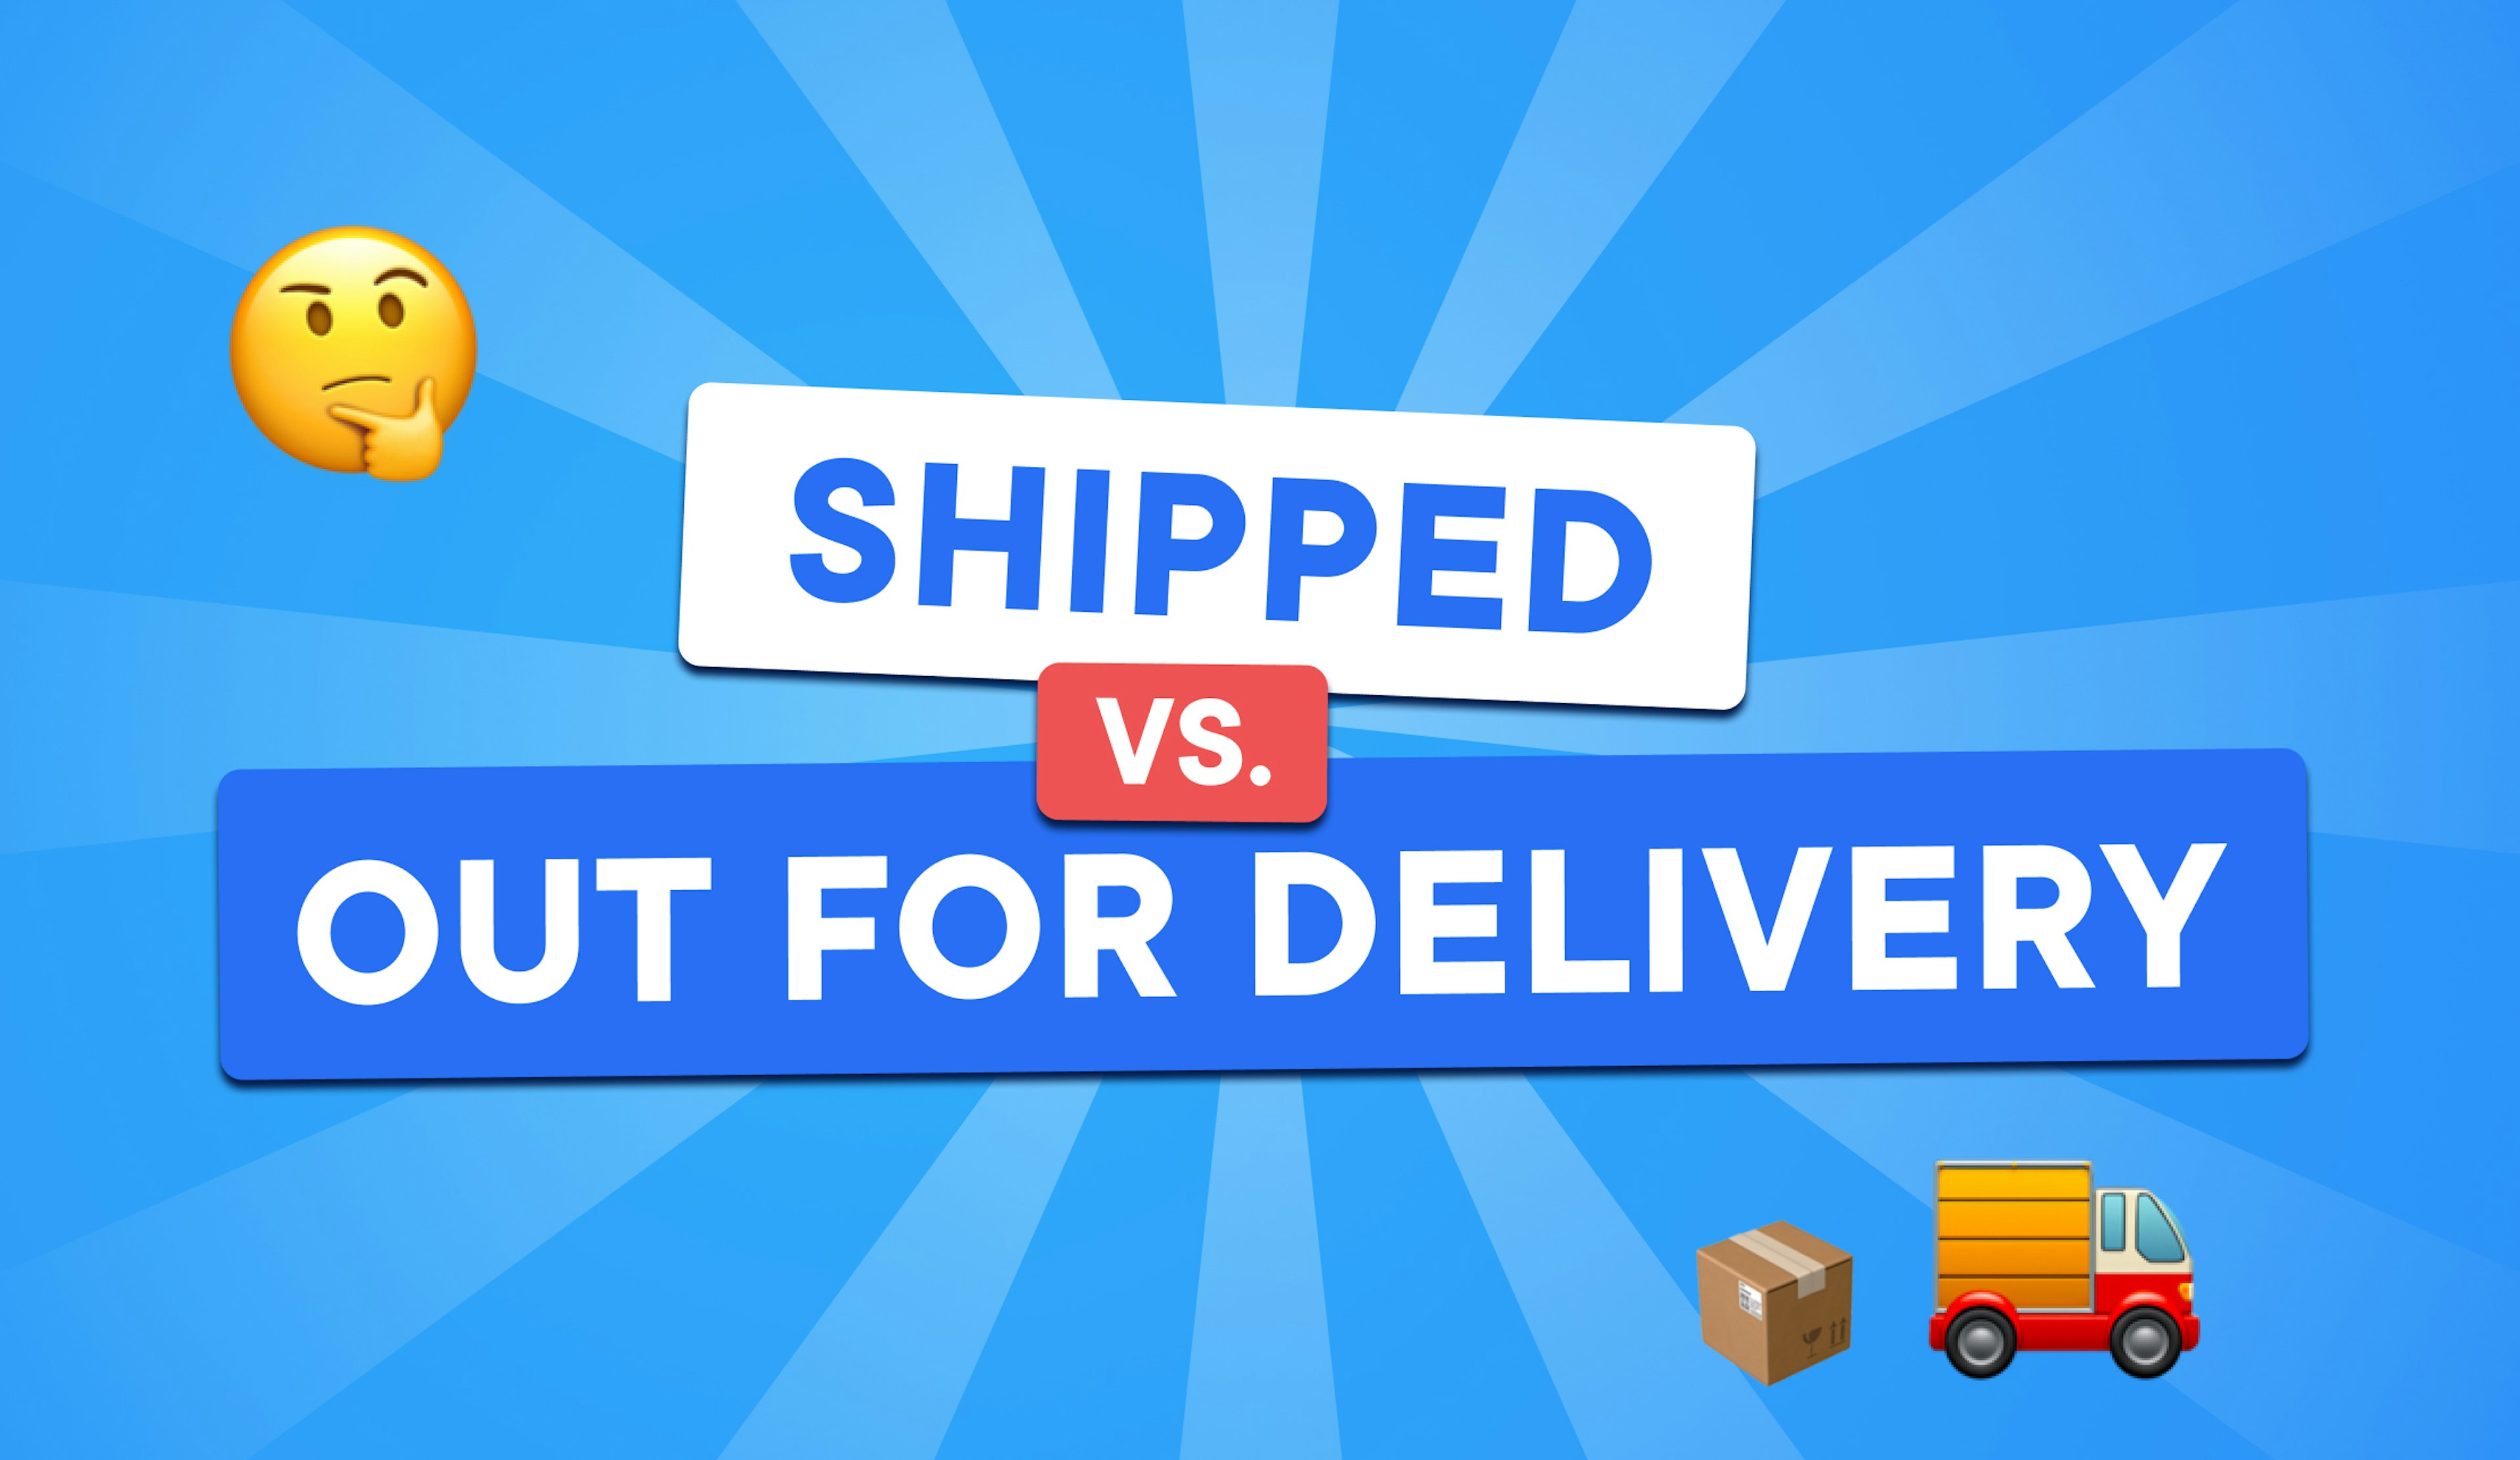 What Is the Difference Between Shipped and Out for Delivery?